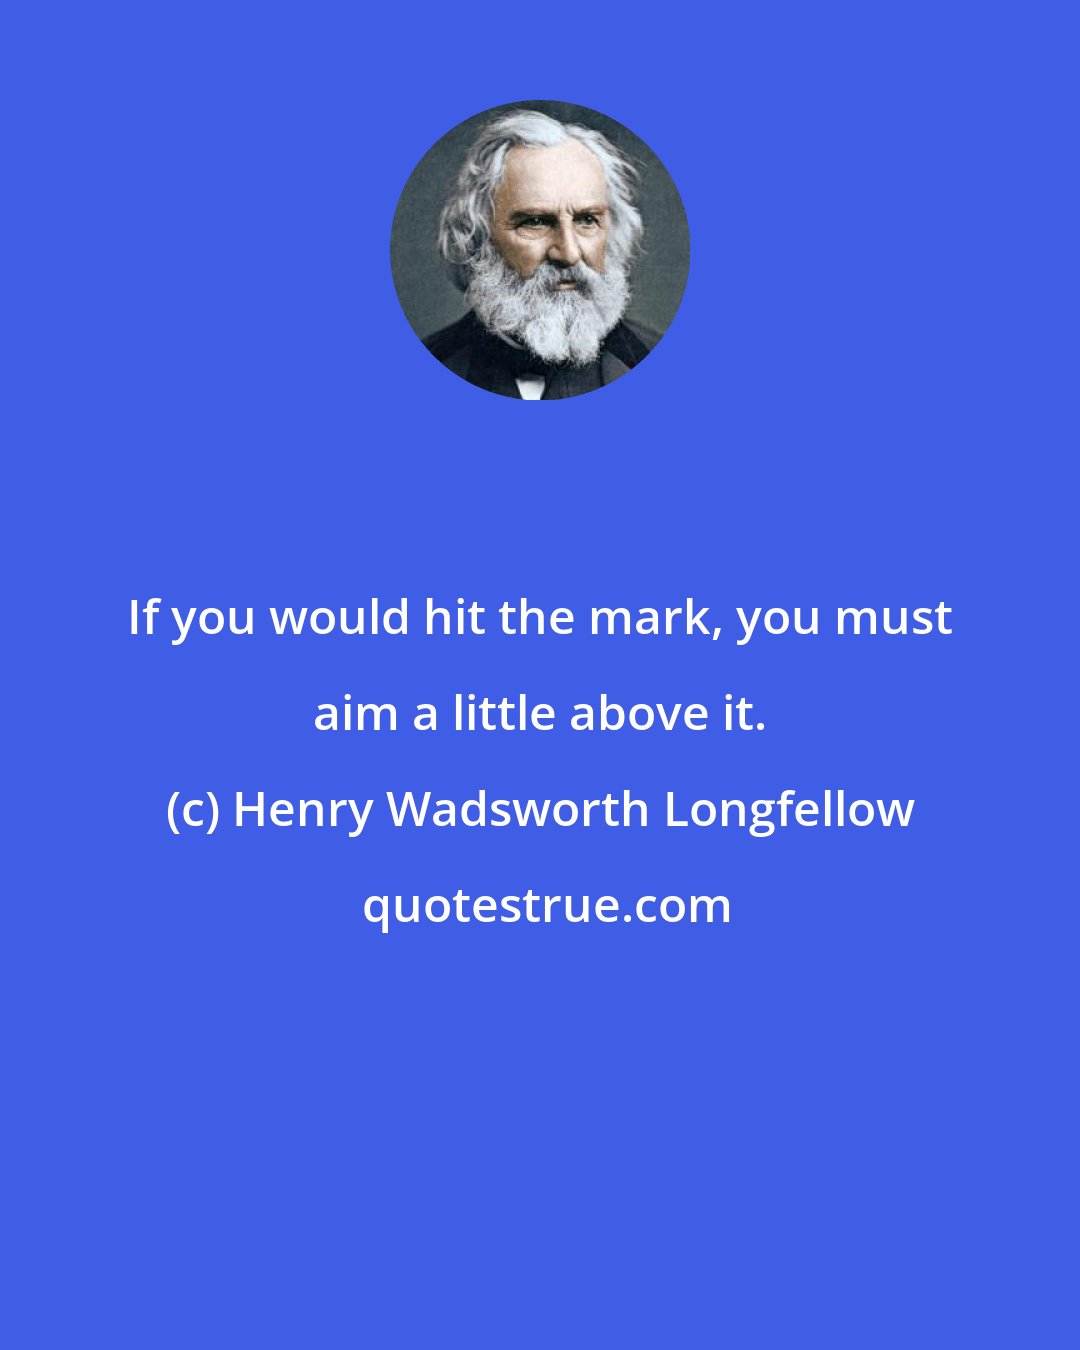 Henry Wadsworth Longfellow: If you would hit the mark, you must aim a little above it.